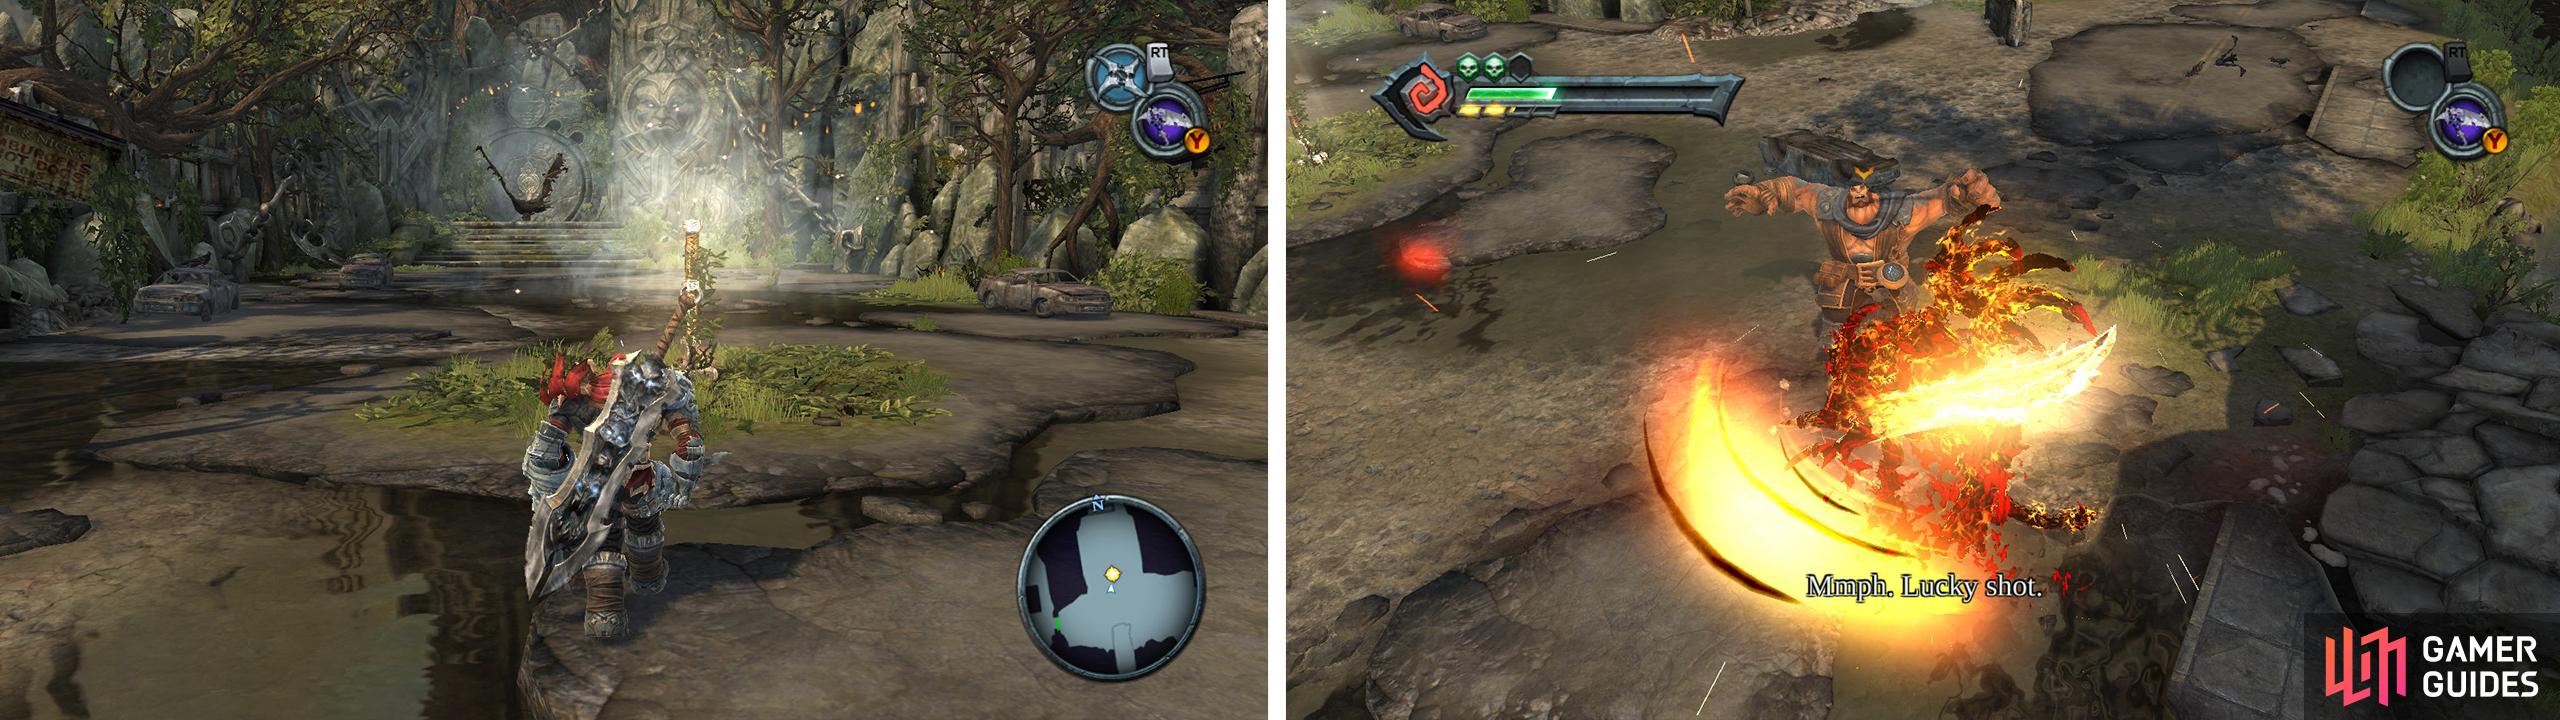 Approach the hammer to trigger a boss fight (left). Enter Chaos Form and attack until the fight ends (right).